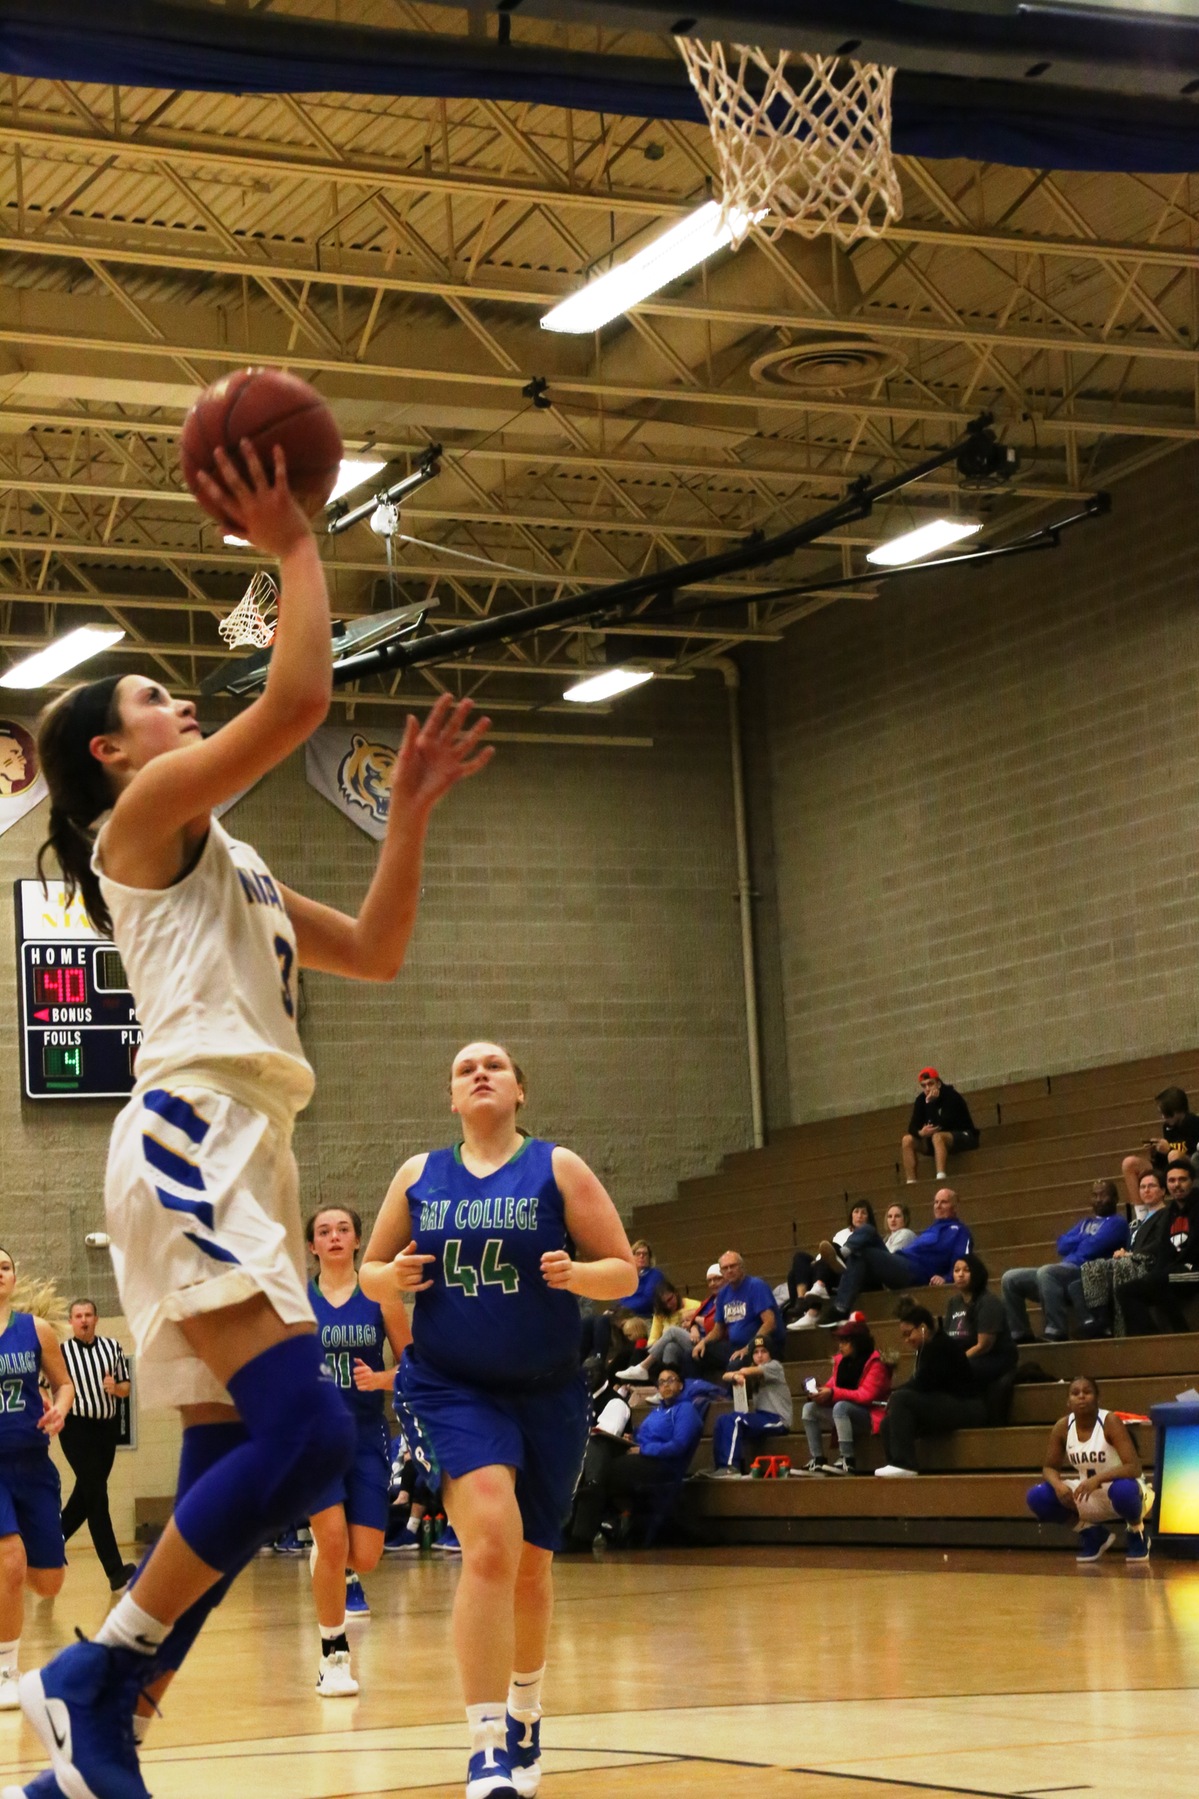 Mandy Willems scores on a layup against Bay College in Saturday's game at the Konigsmark Klassic.